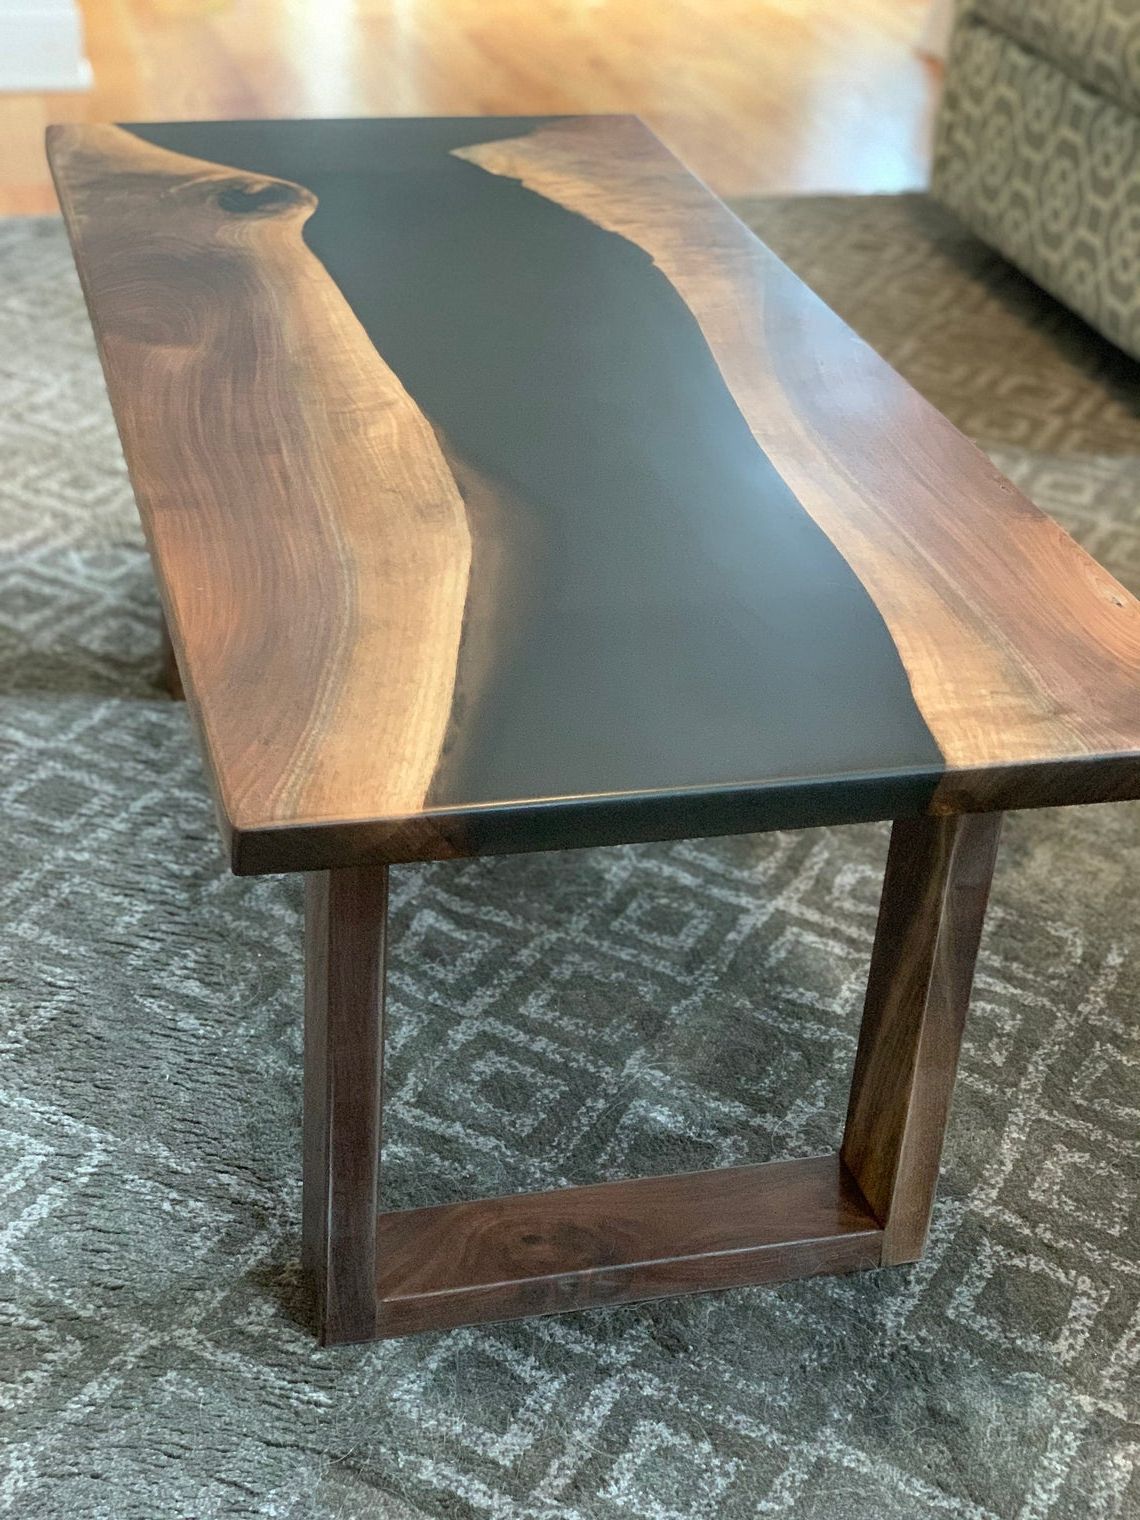 Fashionable Walnut Coffee Tables Inside Black Walnut Epoxy River Coffee Table Or Bench – Maxiwoods (Gallery 1 of 20)